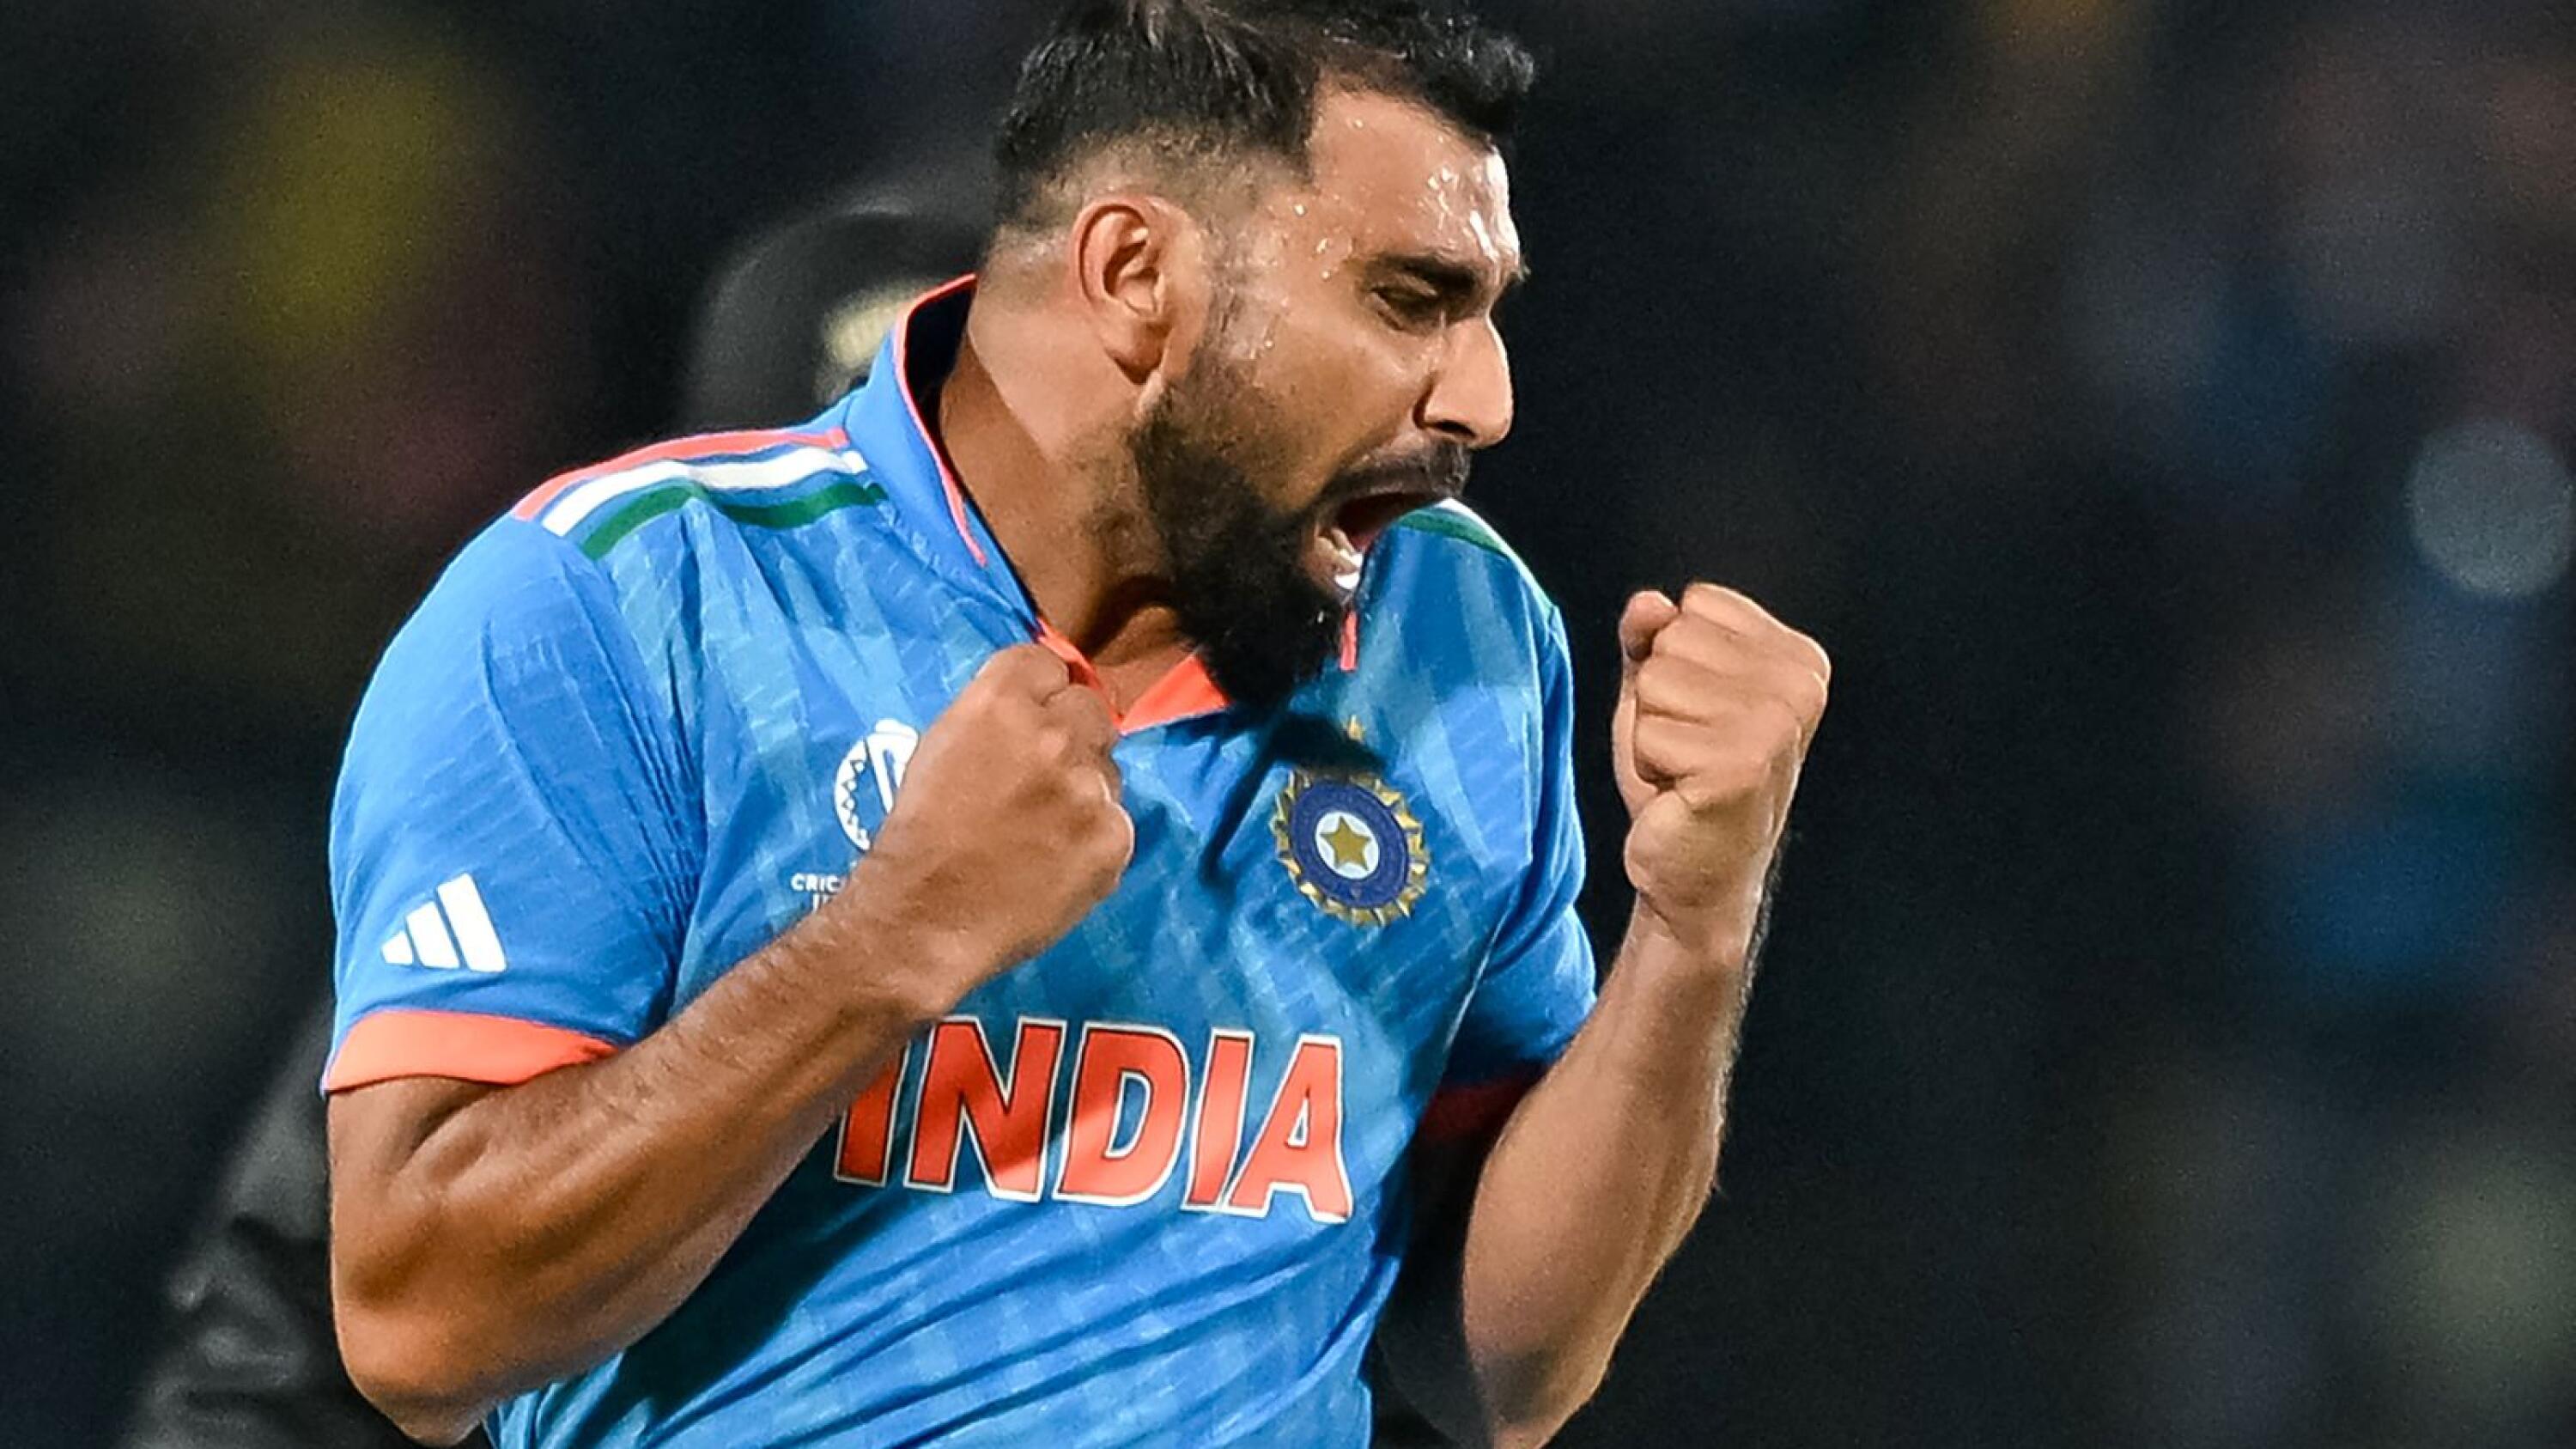 Mohammed Shami picked up four wickets as India defeated England in their Cricket World Cup clash on Sunday